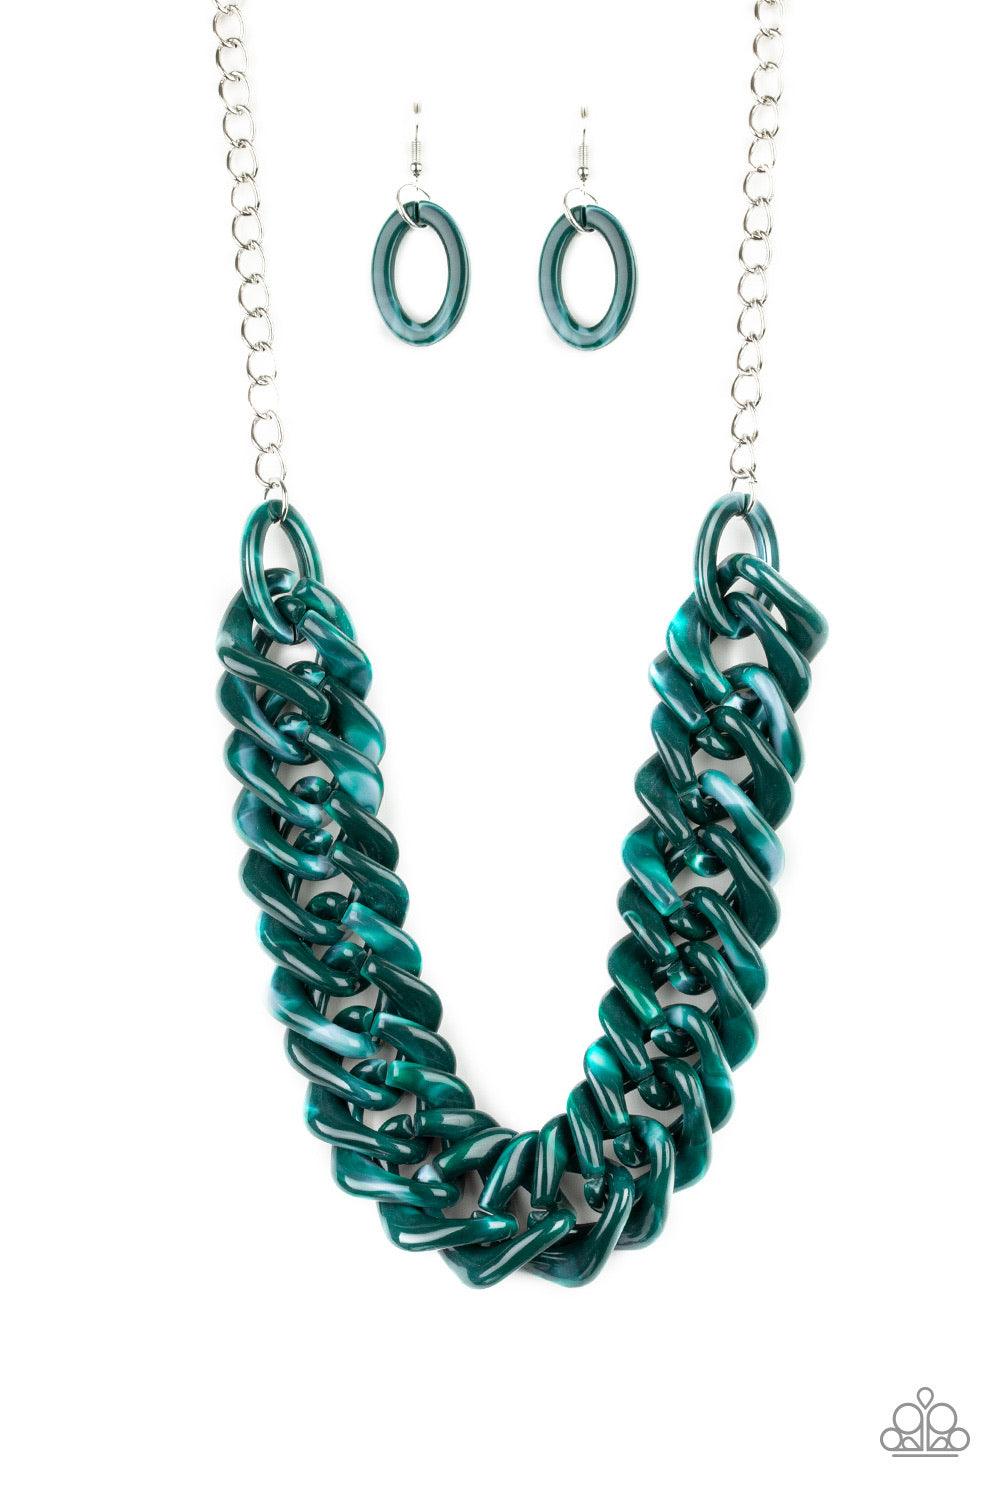 Paparazzi Accessories Comin In HAUTE - Green Brushed in a faux marble finish, square green acrylic links subtlety twist as they link below the collar for a colorful statement-making look. Features an adjustable clasp closure. Jewelry